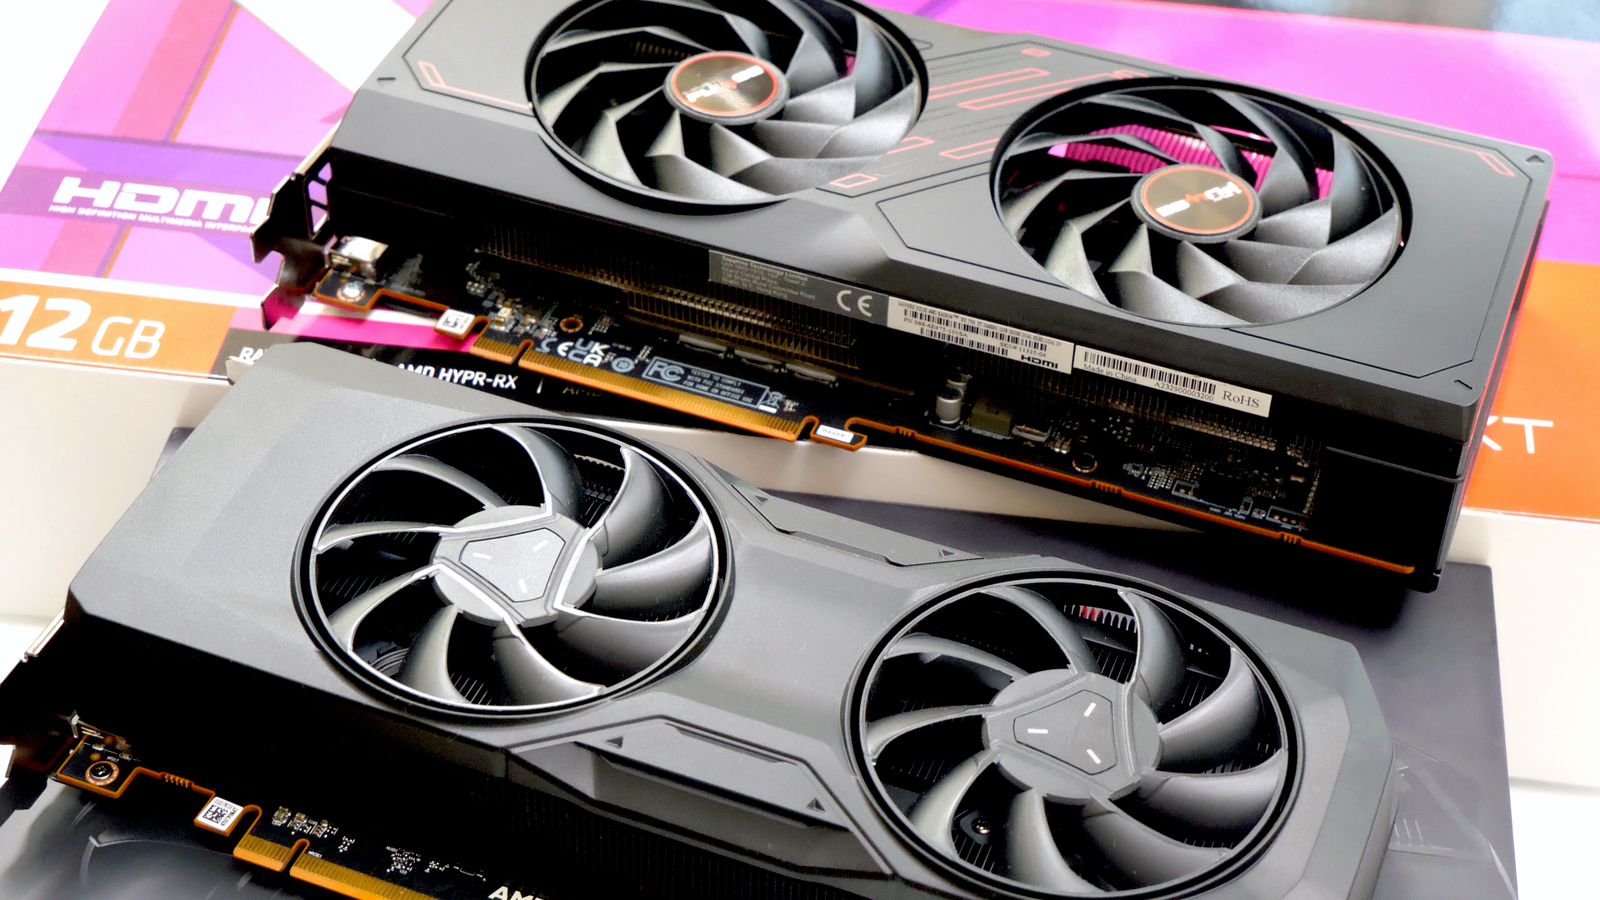 AMD RX 7800 XT and RX 7700 XT review: the price is right